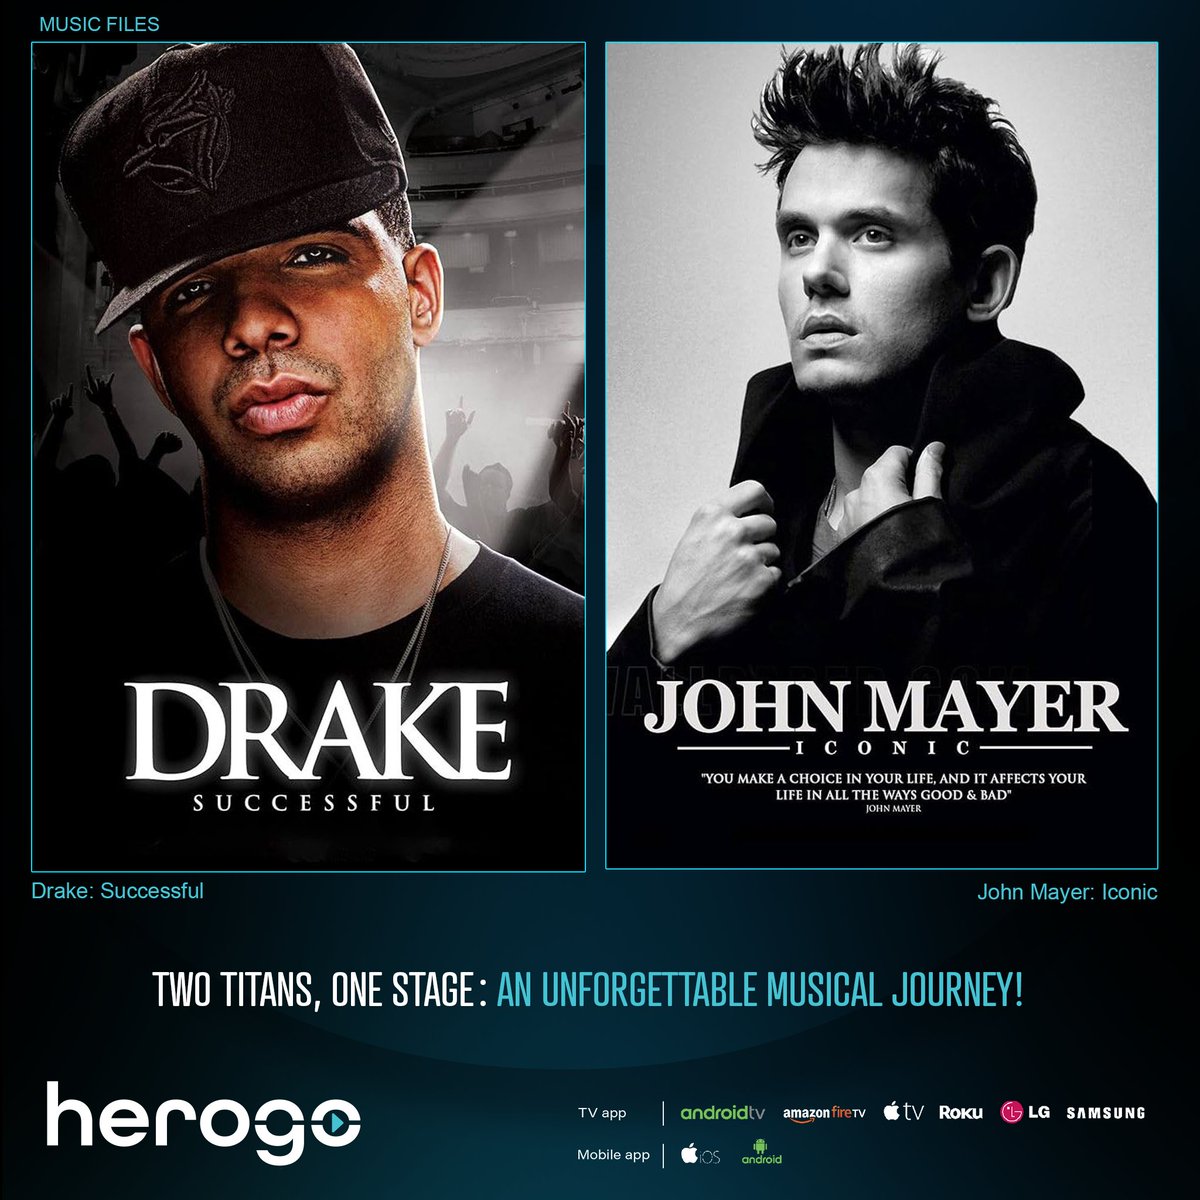 🎵 Celebrate the talent 🎤🎸 and passion for music of two incredible artists with these documentaries. Now streaming. On Herogo! 🔥

#musician #documentary #musicianlifestyle #musicicon #singers #freemoviestreaming #gostream #StreamingNow